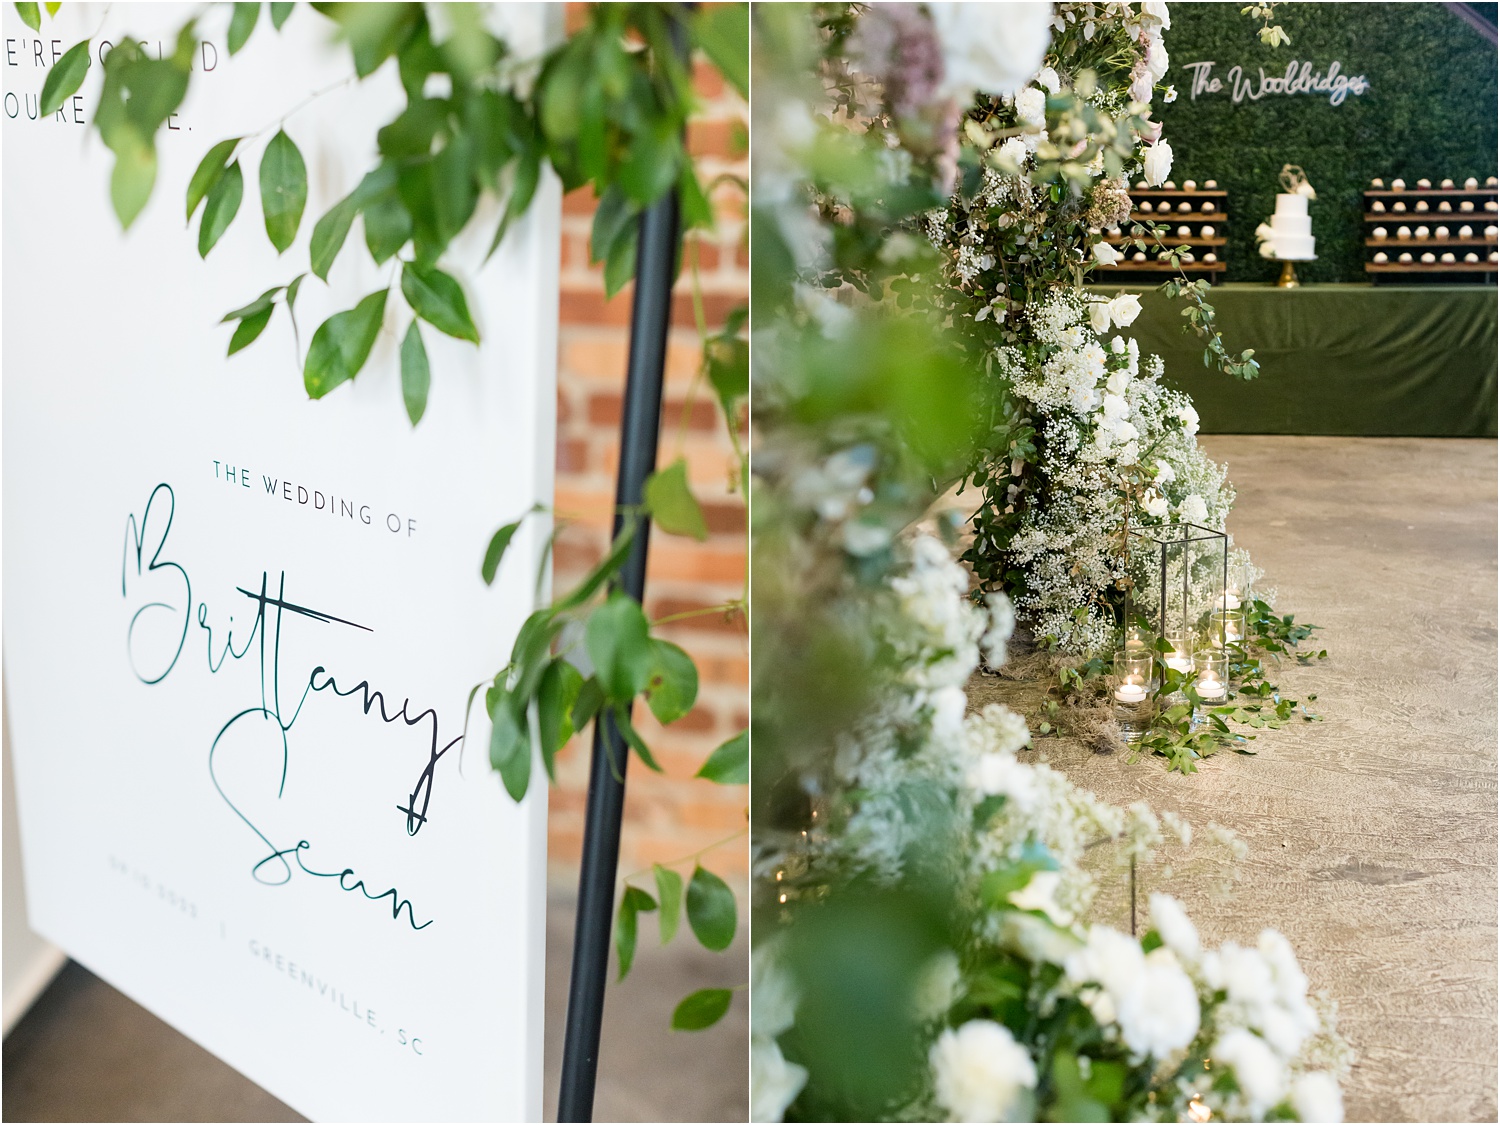 whimsical ceremony details